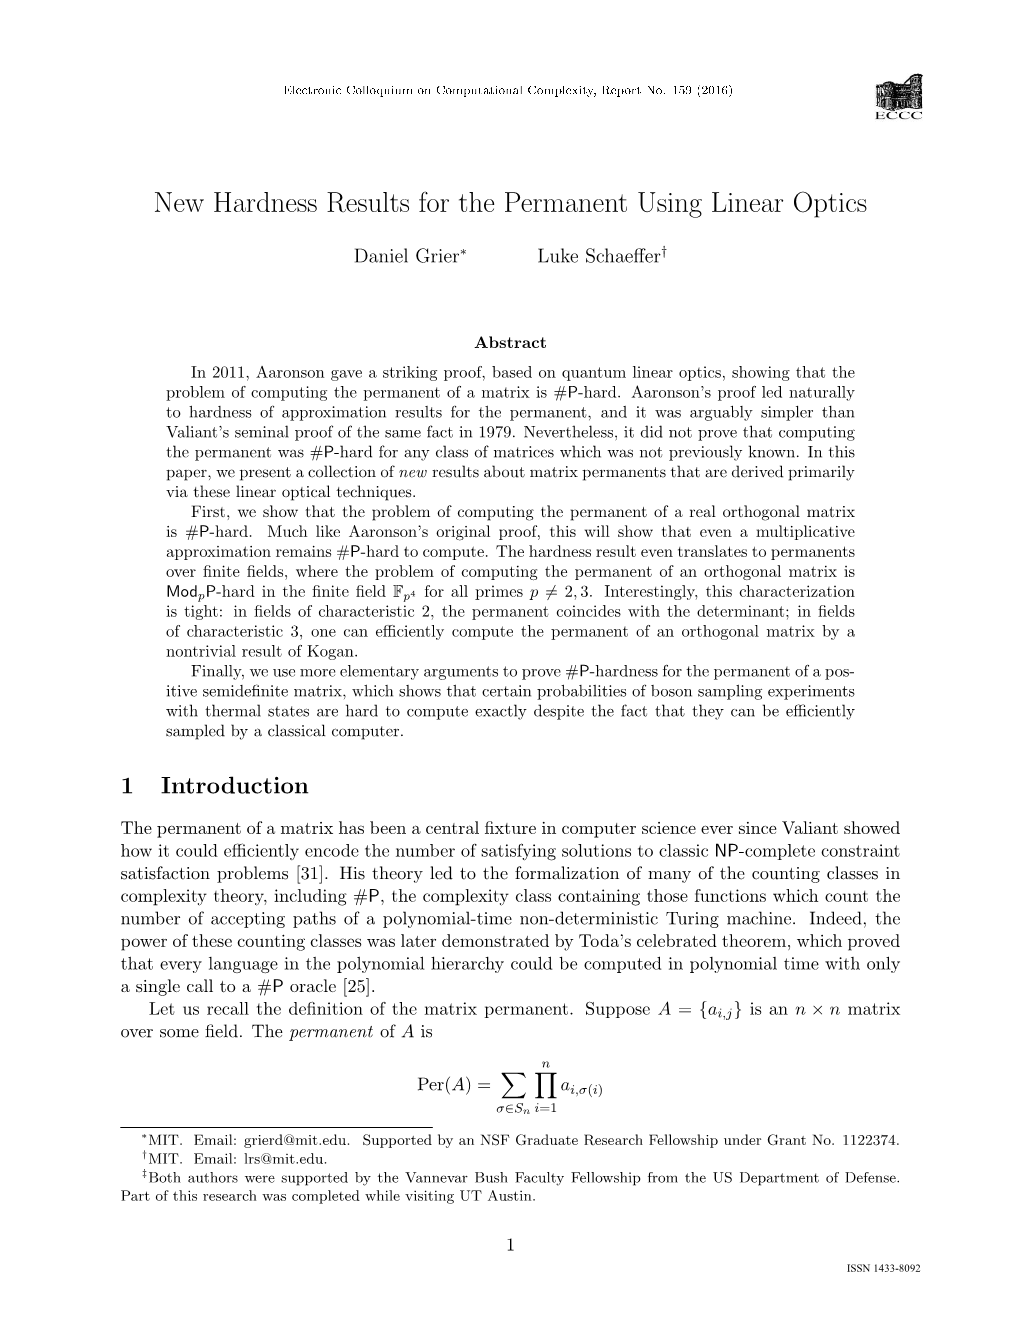 New Hardness Results for the Permanent Using Linear Optics